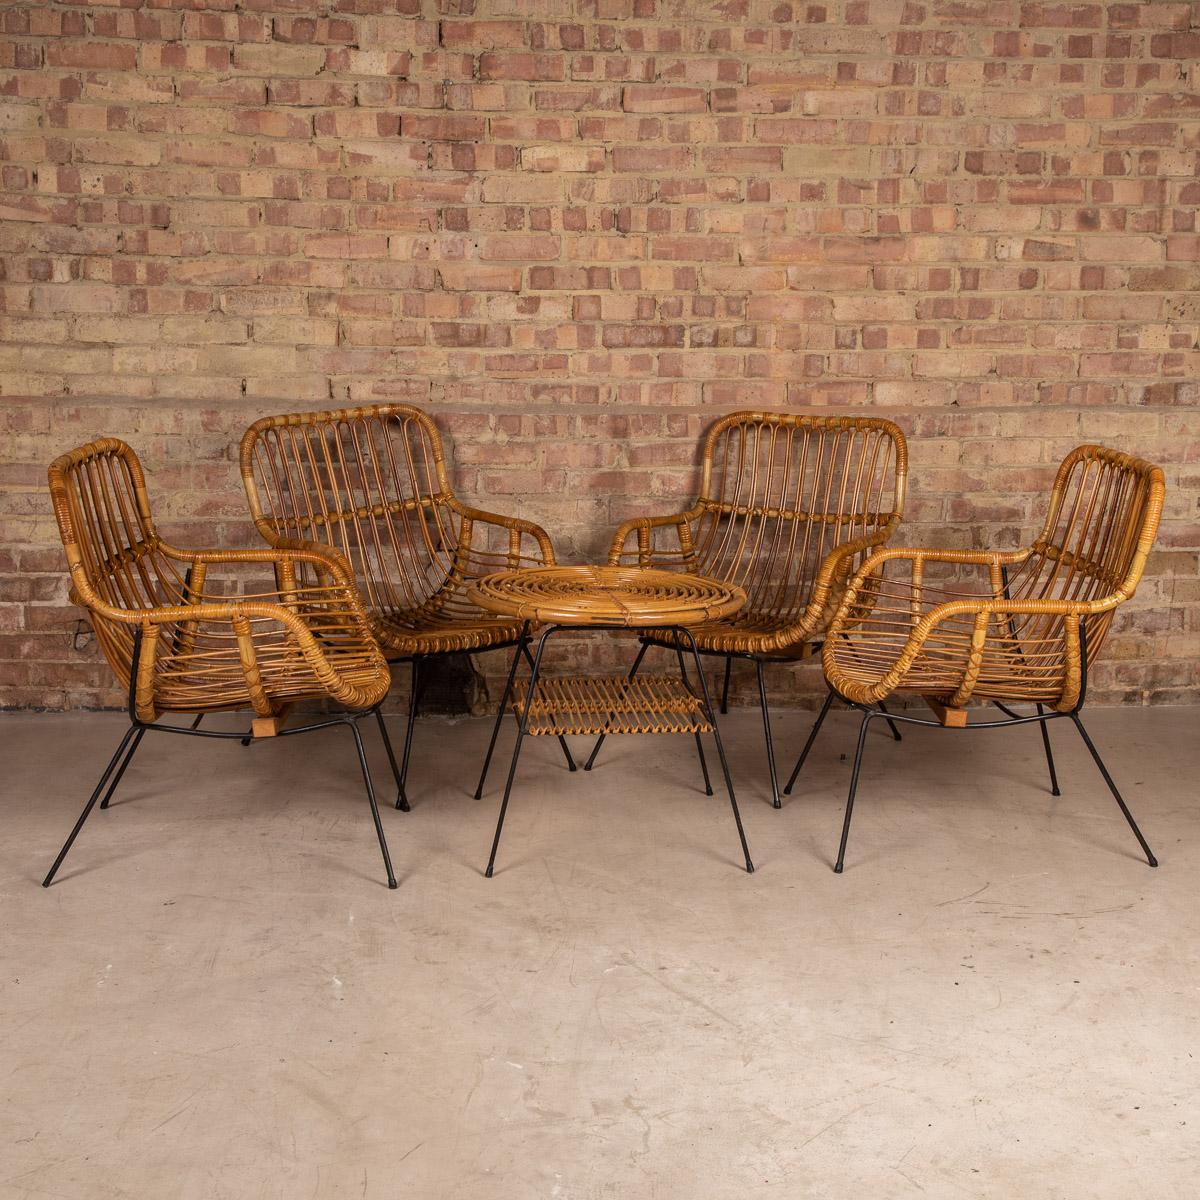 Beautiful mid-20th century Italian set of four chairs and a small table, bamboo woven onto a sturdy metal frame.

Measures: Table
Height 56cm
Width 60m

4 chairs:
Height 85cm
Width 62m
Depth 52cm.